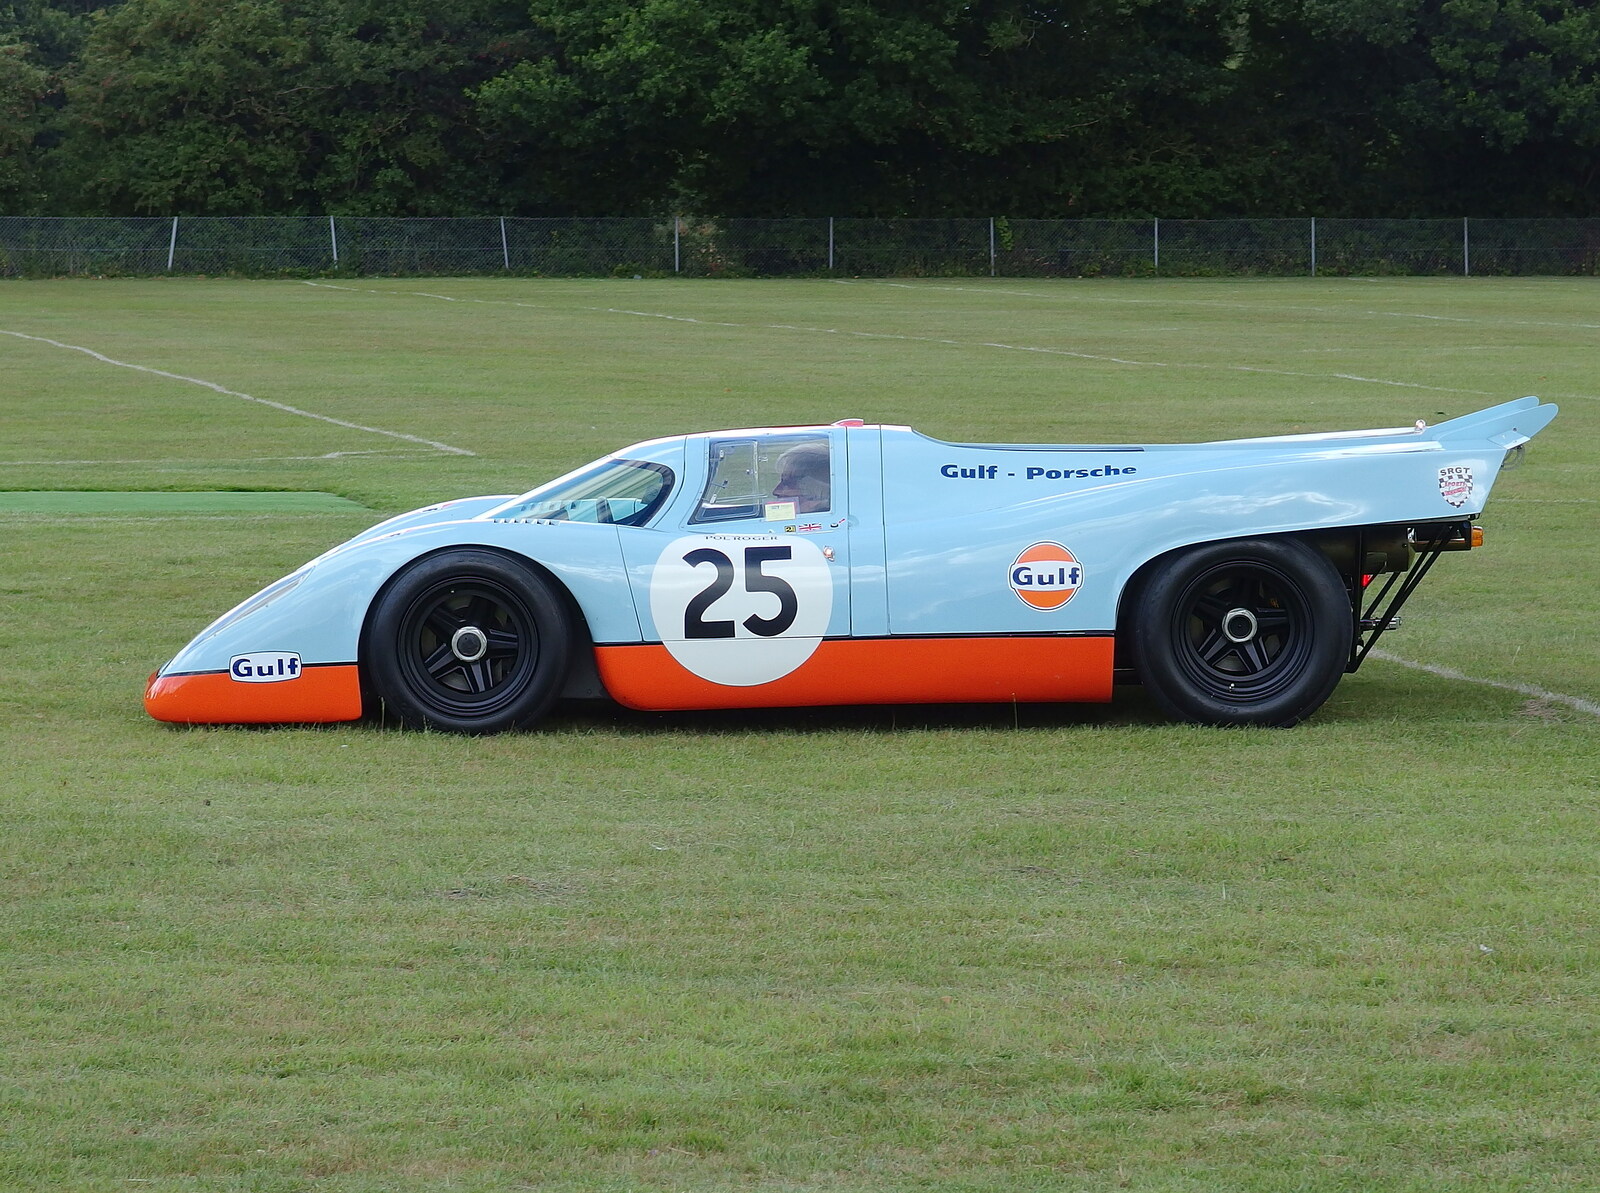 A cool Le Mans-style racing car from Stradbroke Classic Car Show, Stradbroke, Suffolk - 7th September 2013